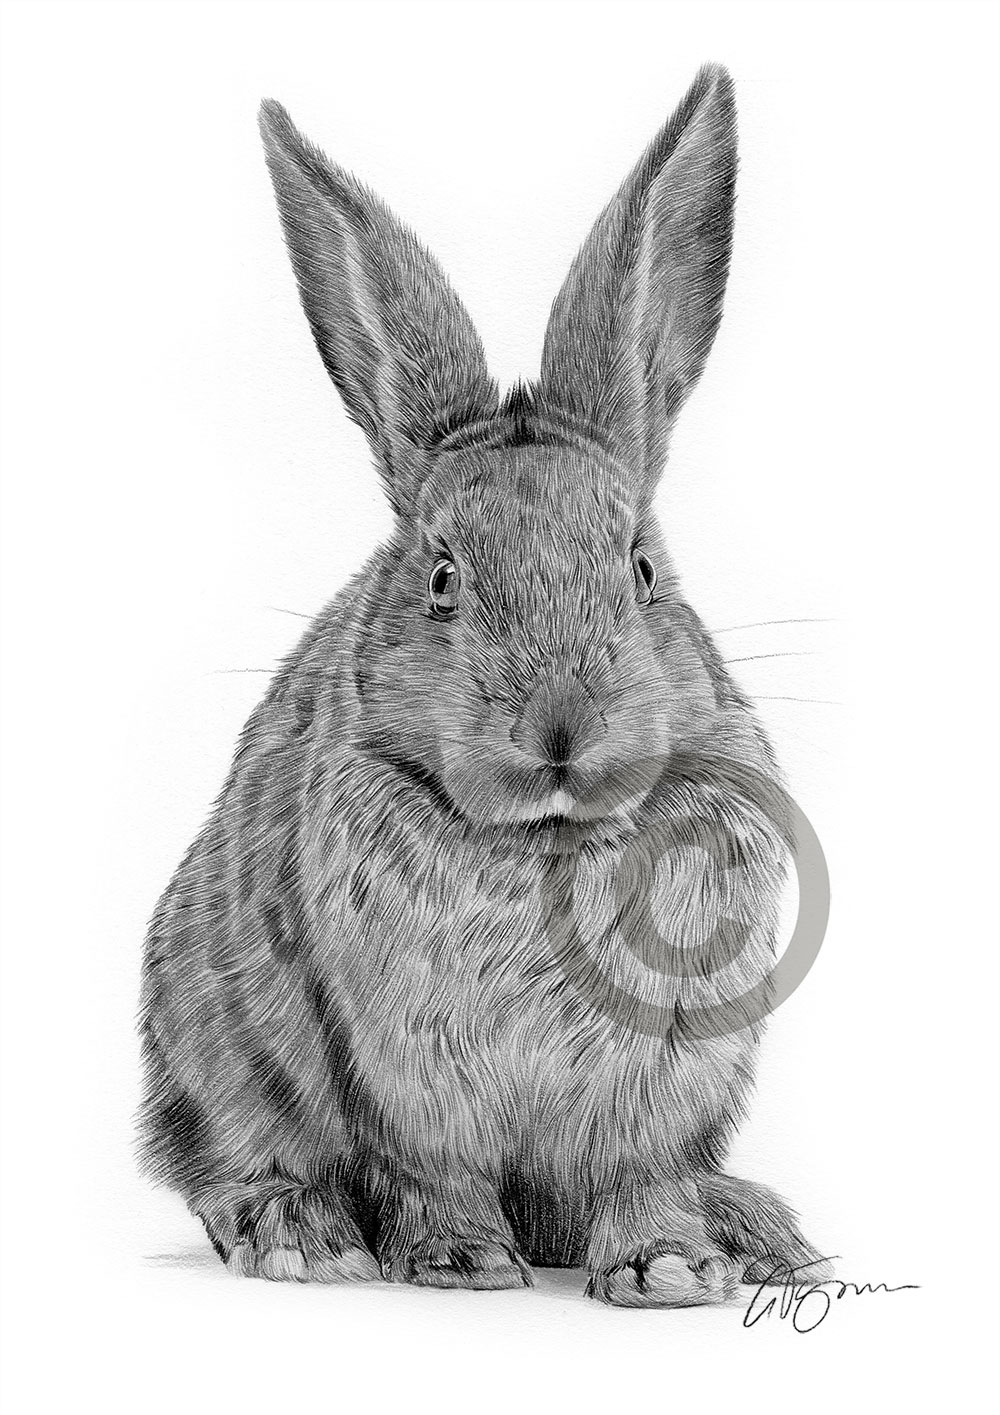 Pencil drawing of a young Rabbit